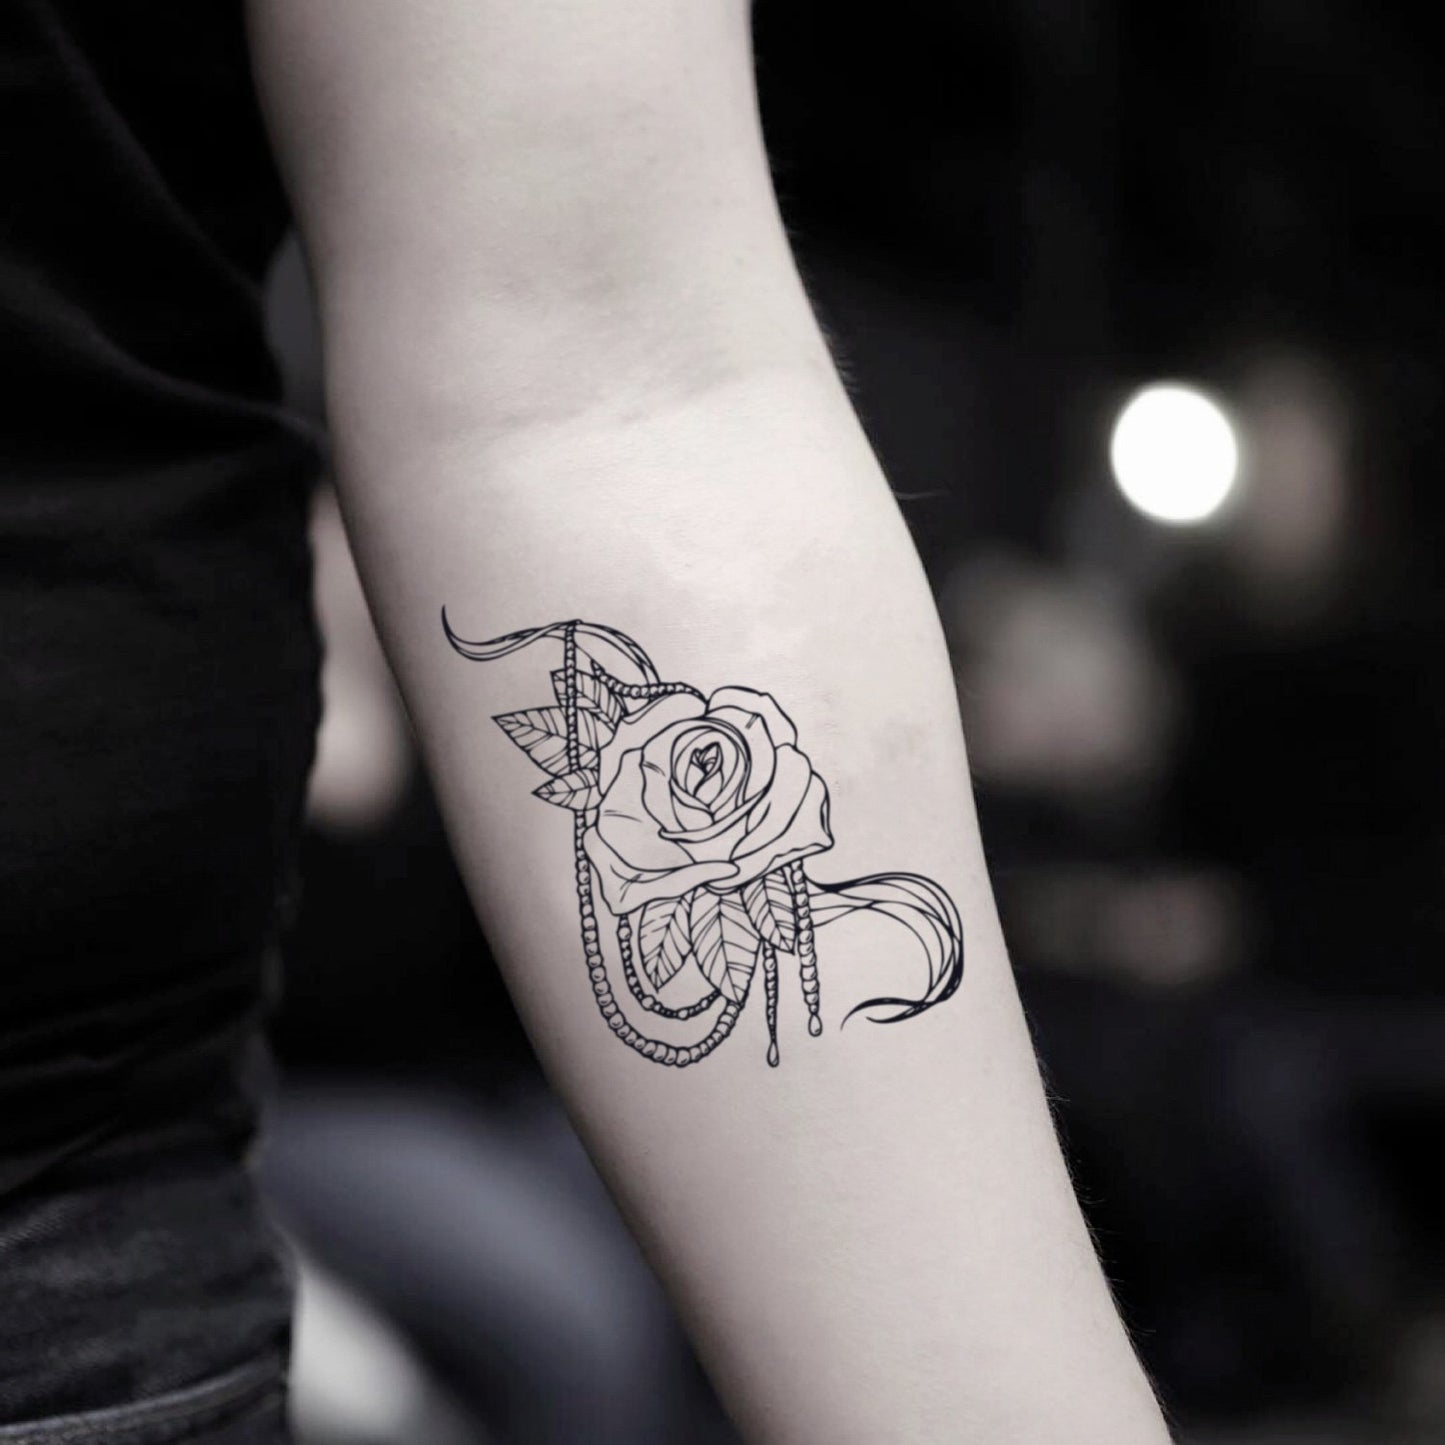 fake small rose and pearl flower temporary tattoo sticker design idea on inner arm